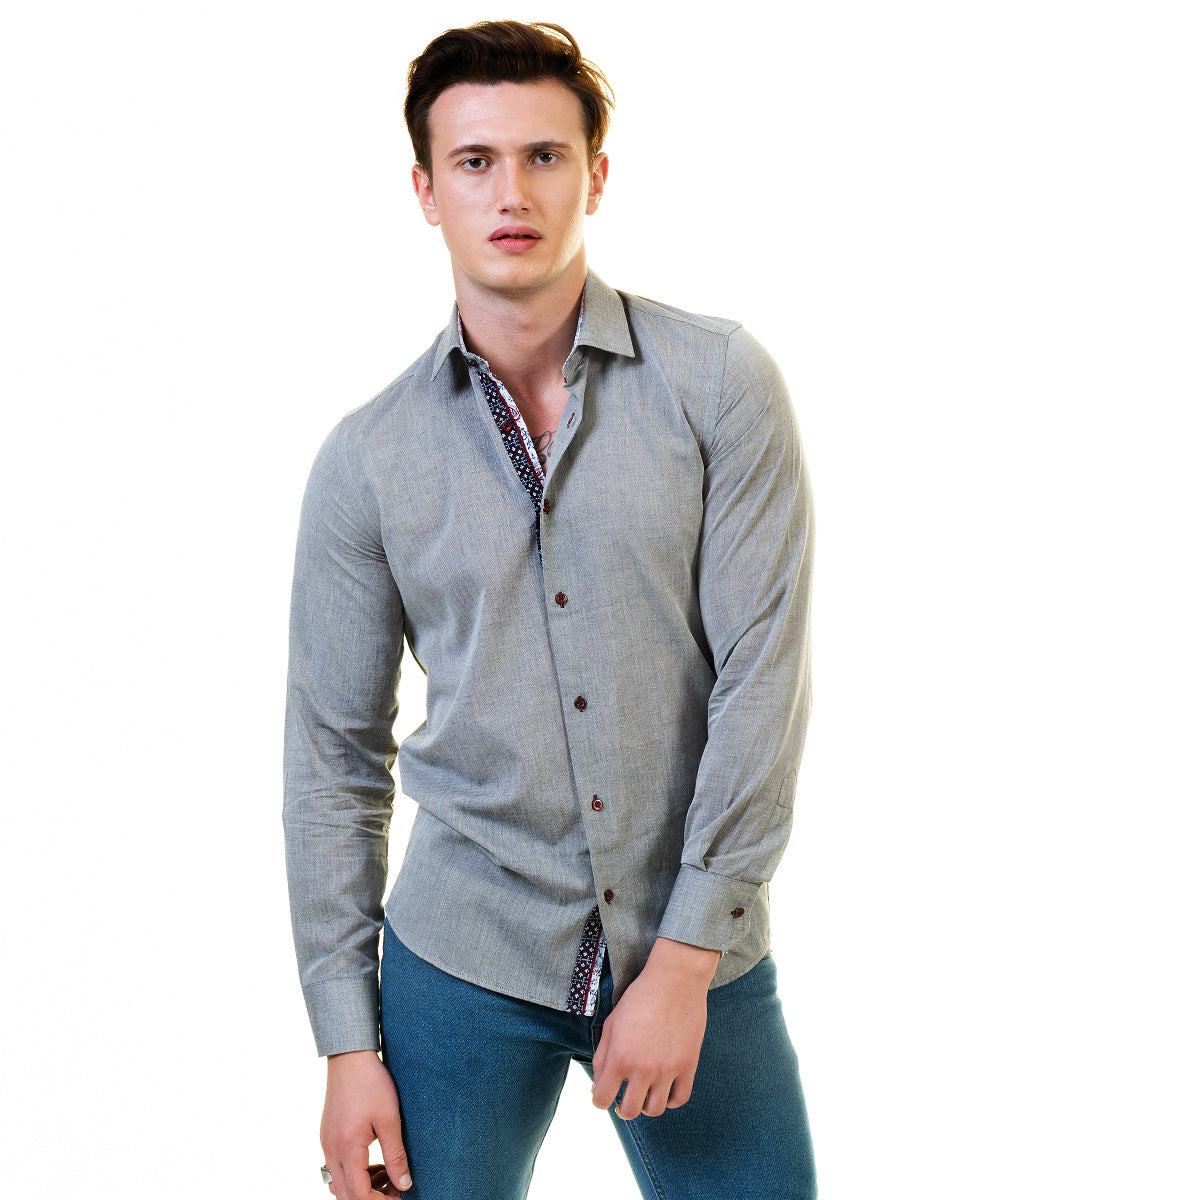 Pastel Grey Mens Slim Fit Designer Dress Shirt - Tailored Cotton Shirts For Work And Casual